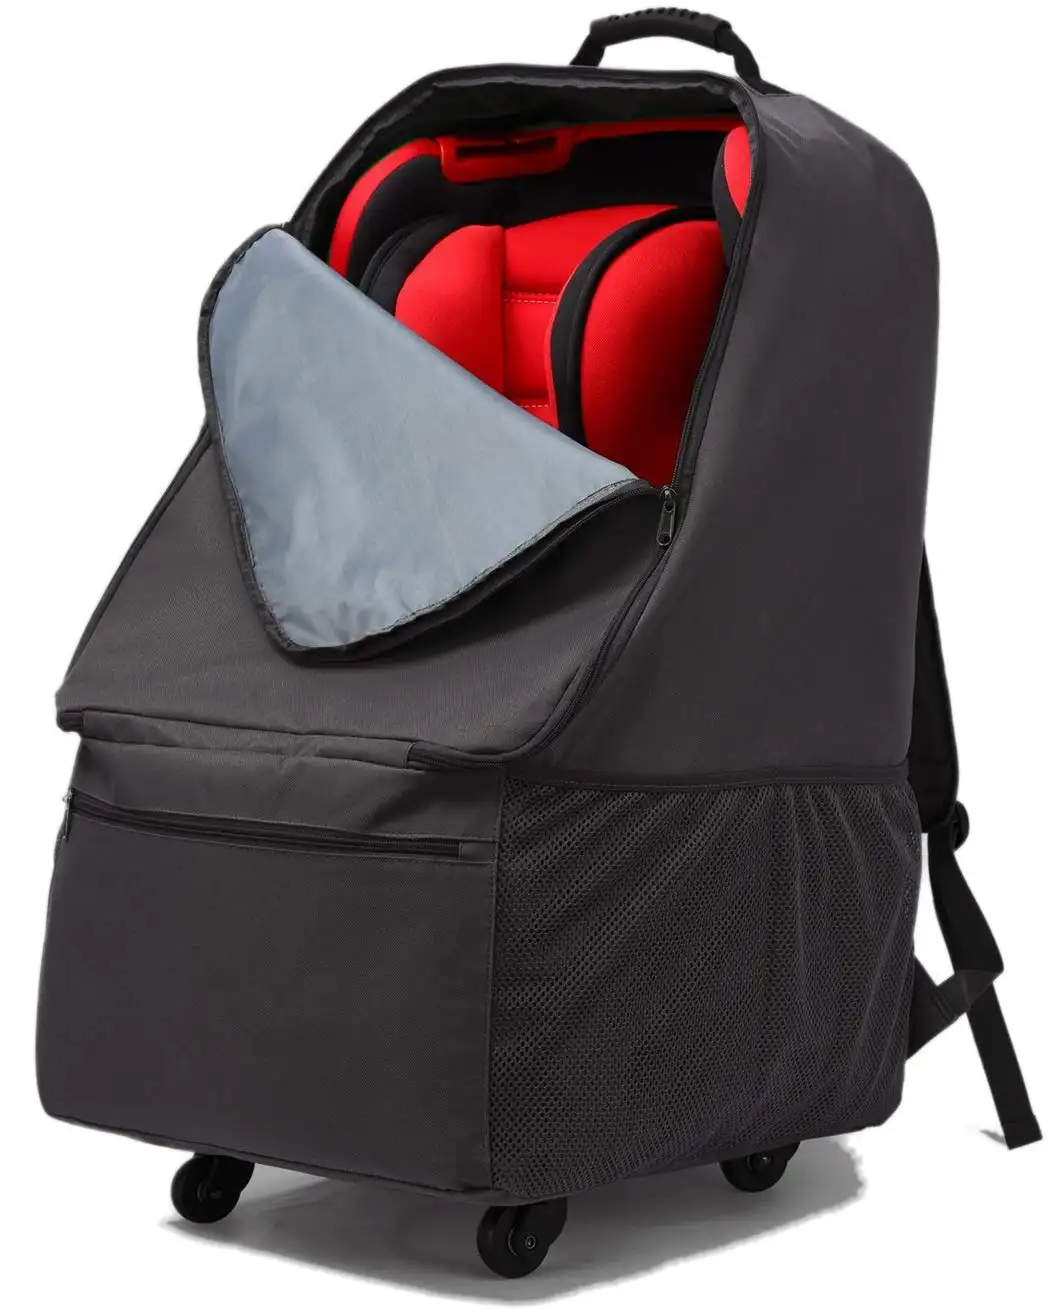 Travel Air Infant Carseat Cover With Wheels Baby Car Seat Travel Bag